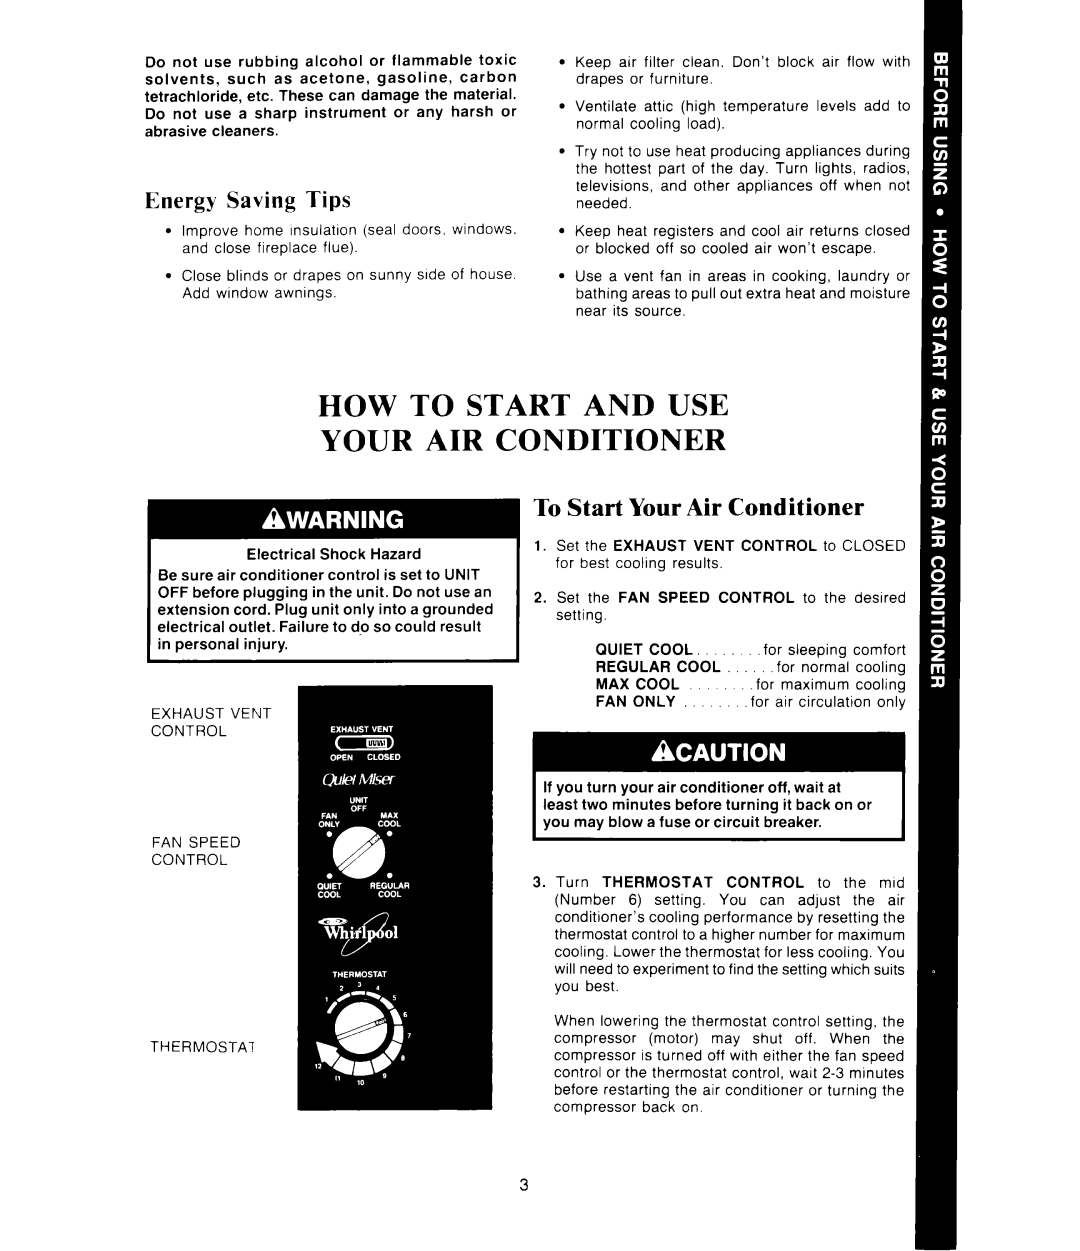 Whirlpool AC1052XS manual HOW TO STA RT AND USE YOUR AIR Ct INDITIONER, Energy Saving Tips, To Start Your Air Conditioner 